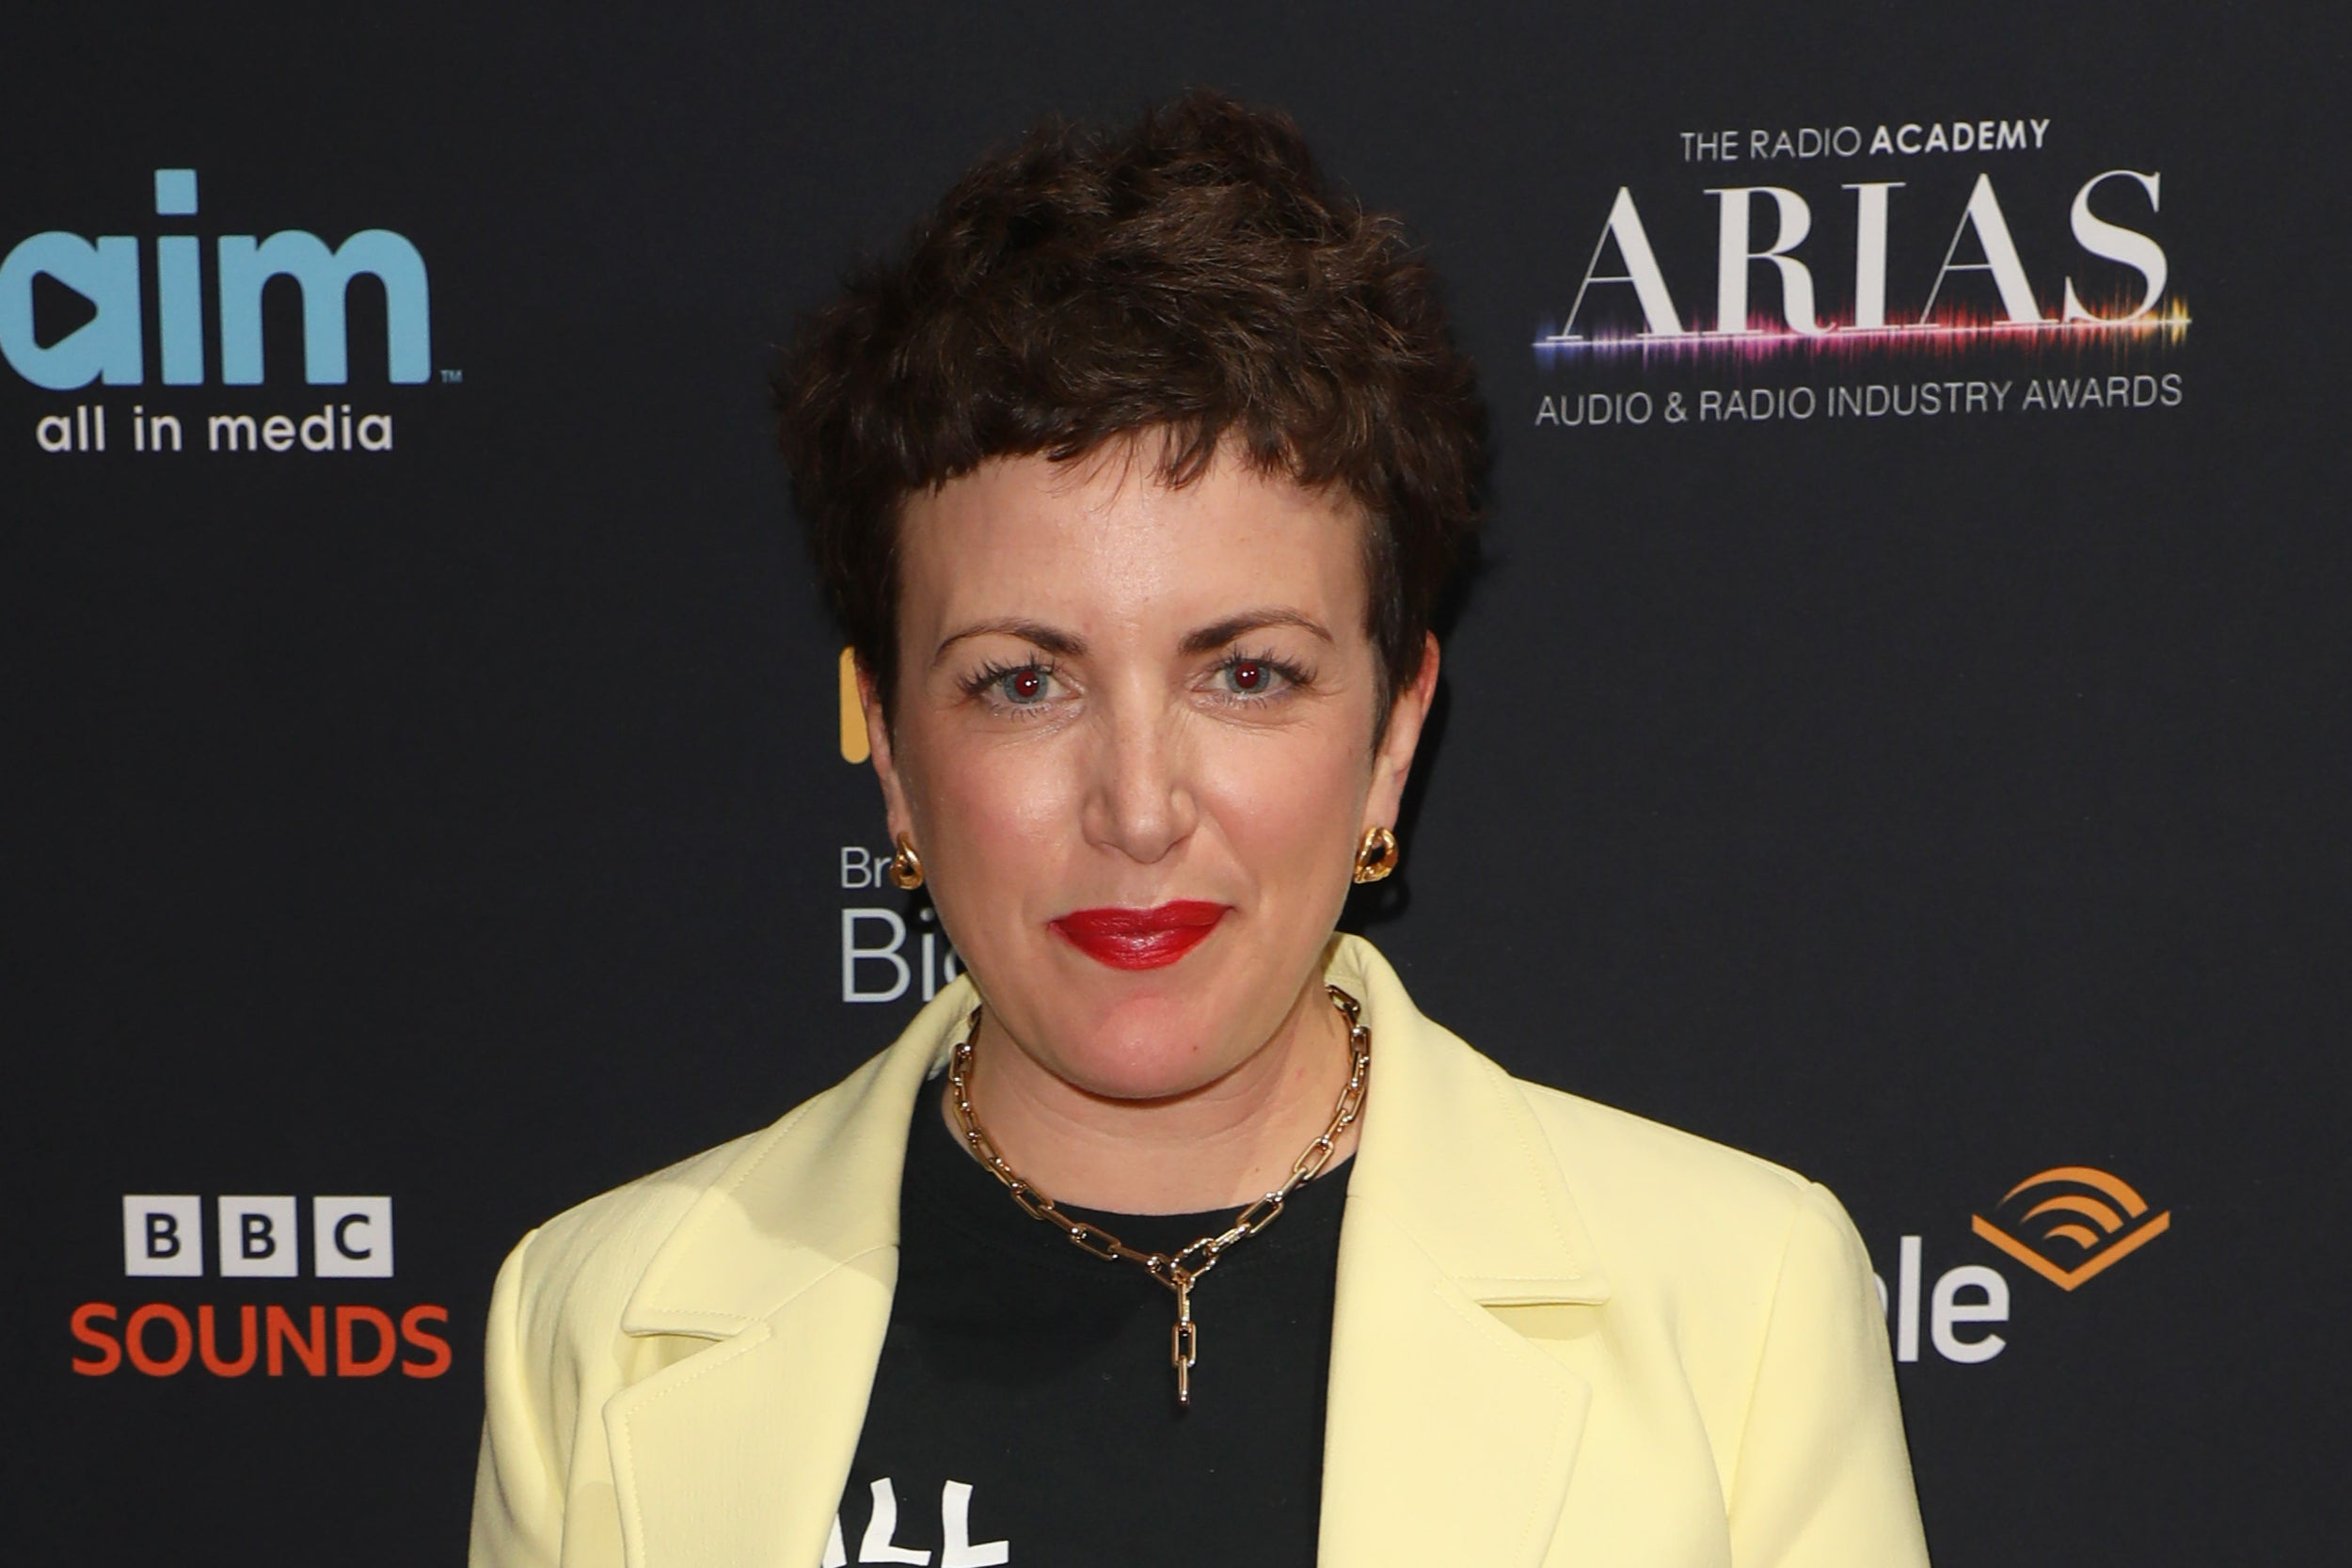 BBC Radio DJ Annie Mac has voiced support for the youth radio station